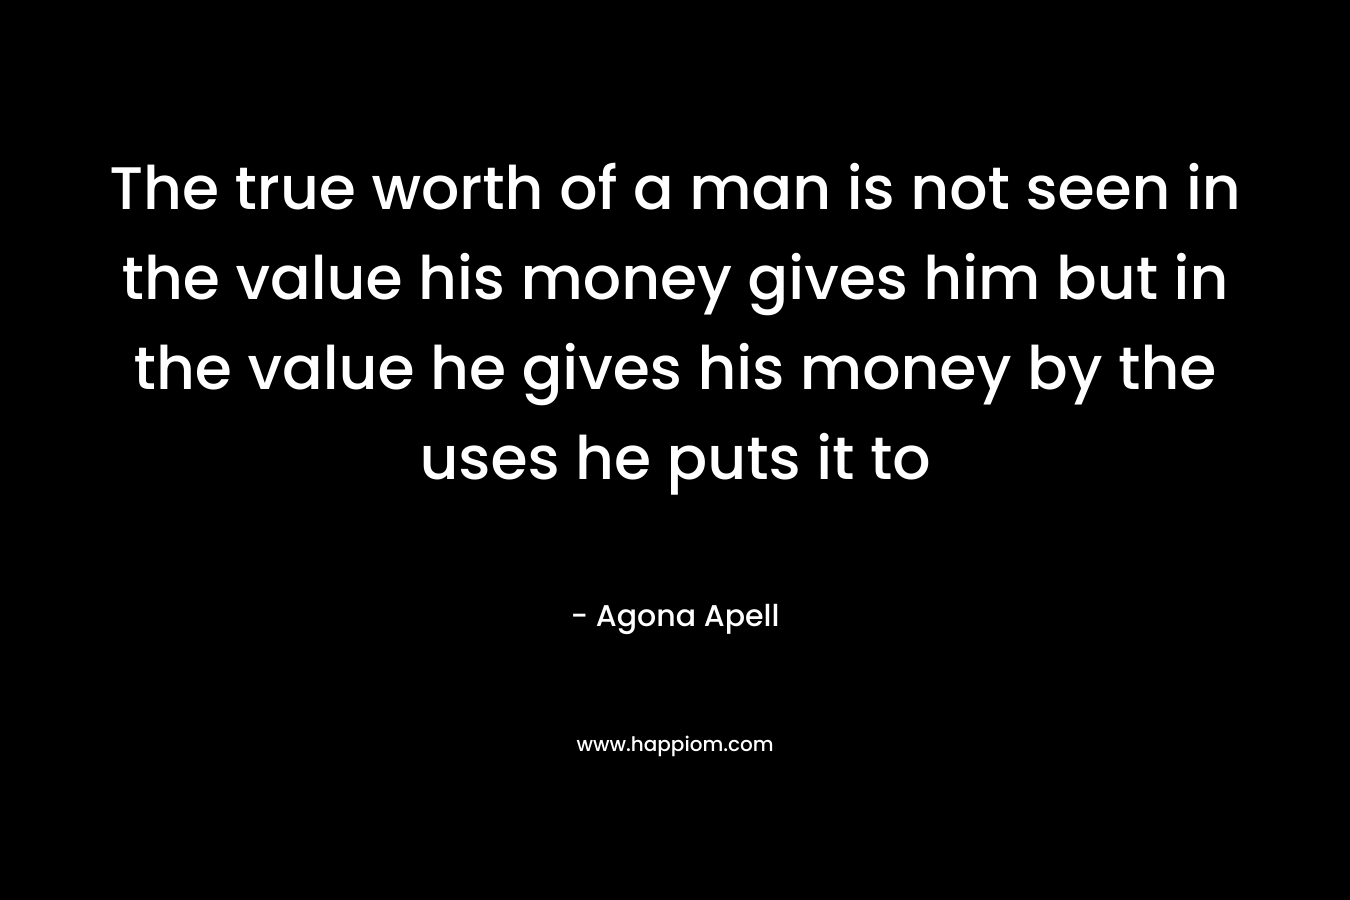 The true worth of a man is not seen in the value his money gives him but in the value he gives his money by the uses he puts it to – Agona Apell